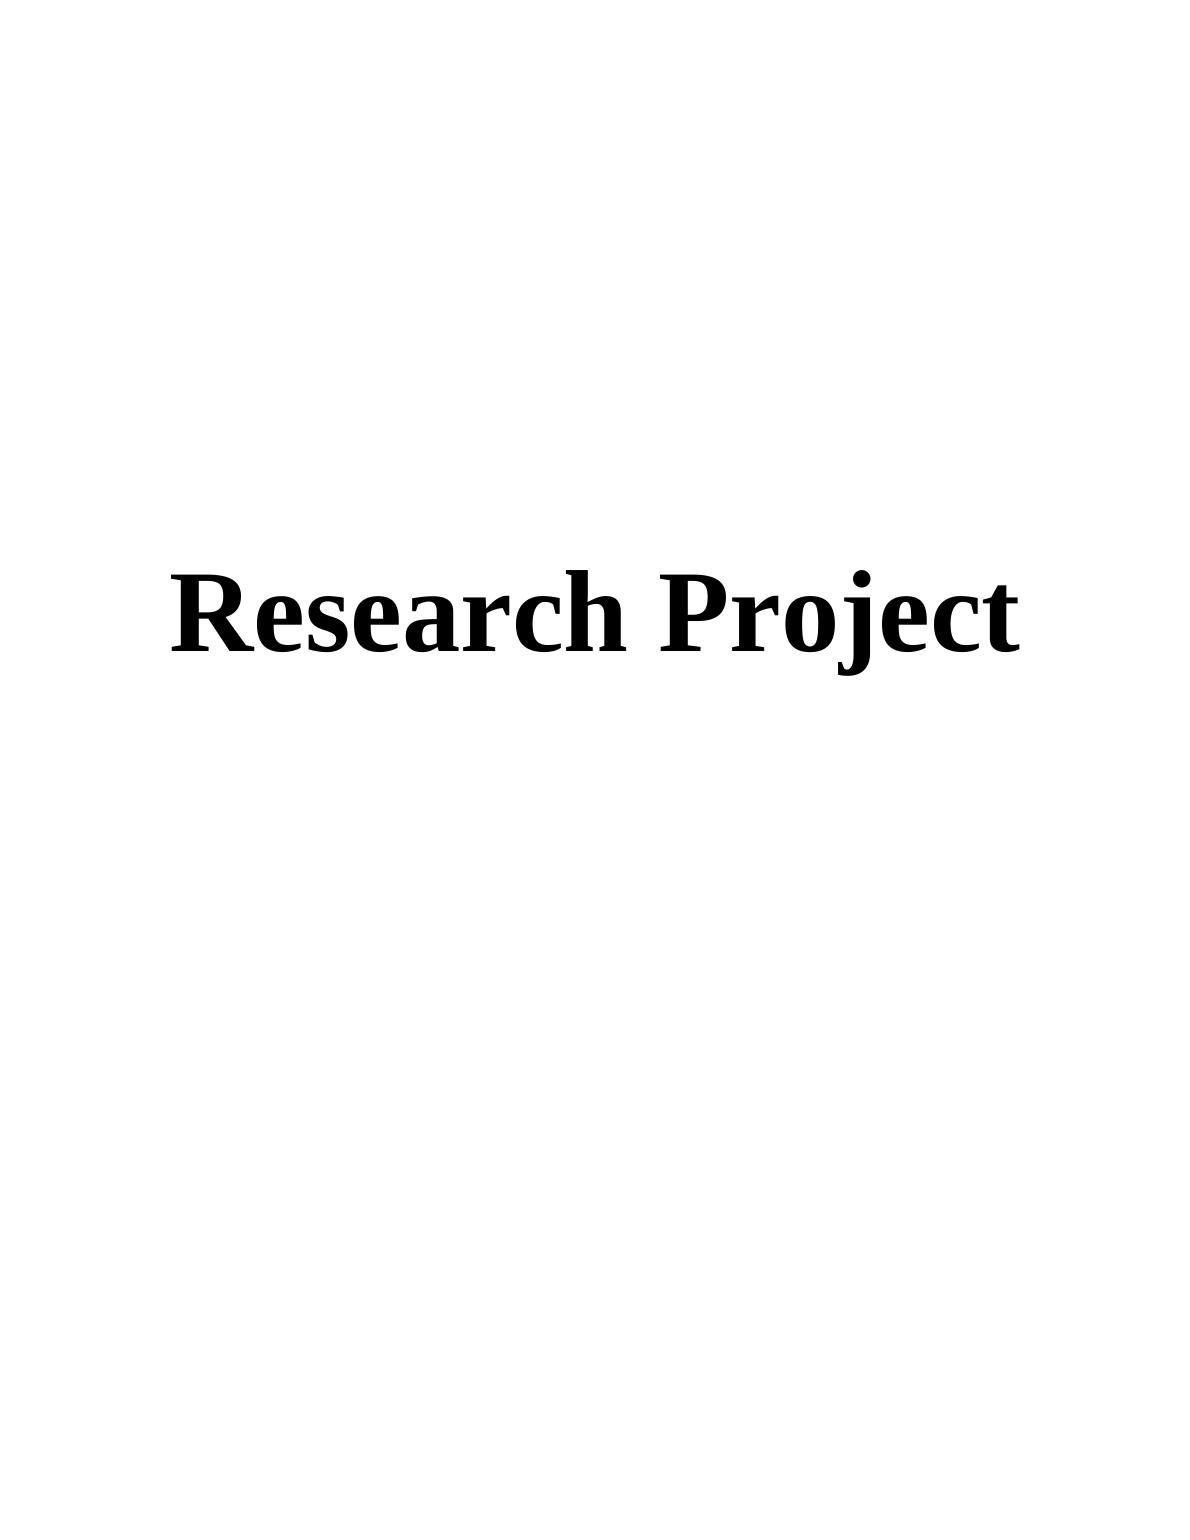 Research Project ABSTRACT: Advertising and Marketing Effect on Business Operations of JJ Food Service_1